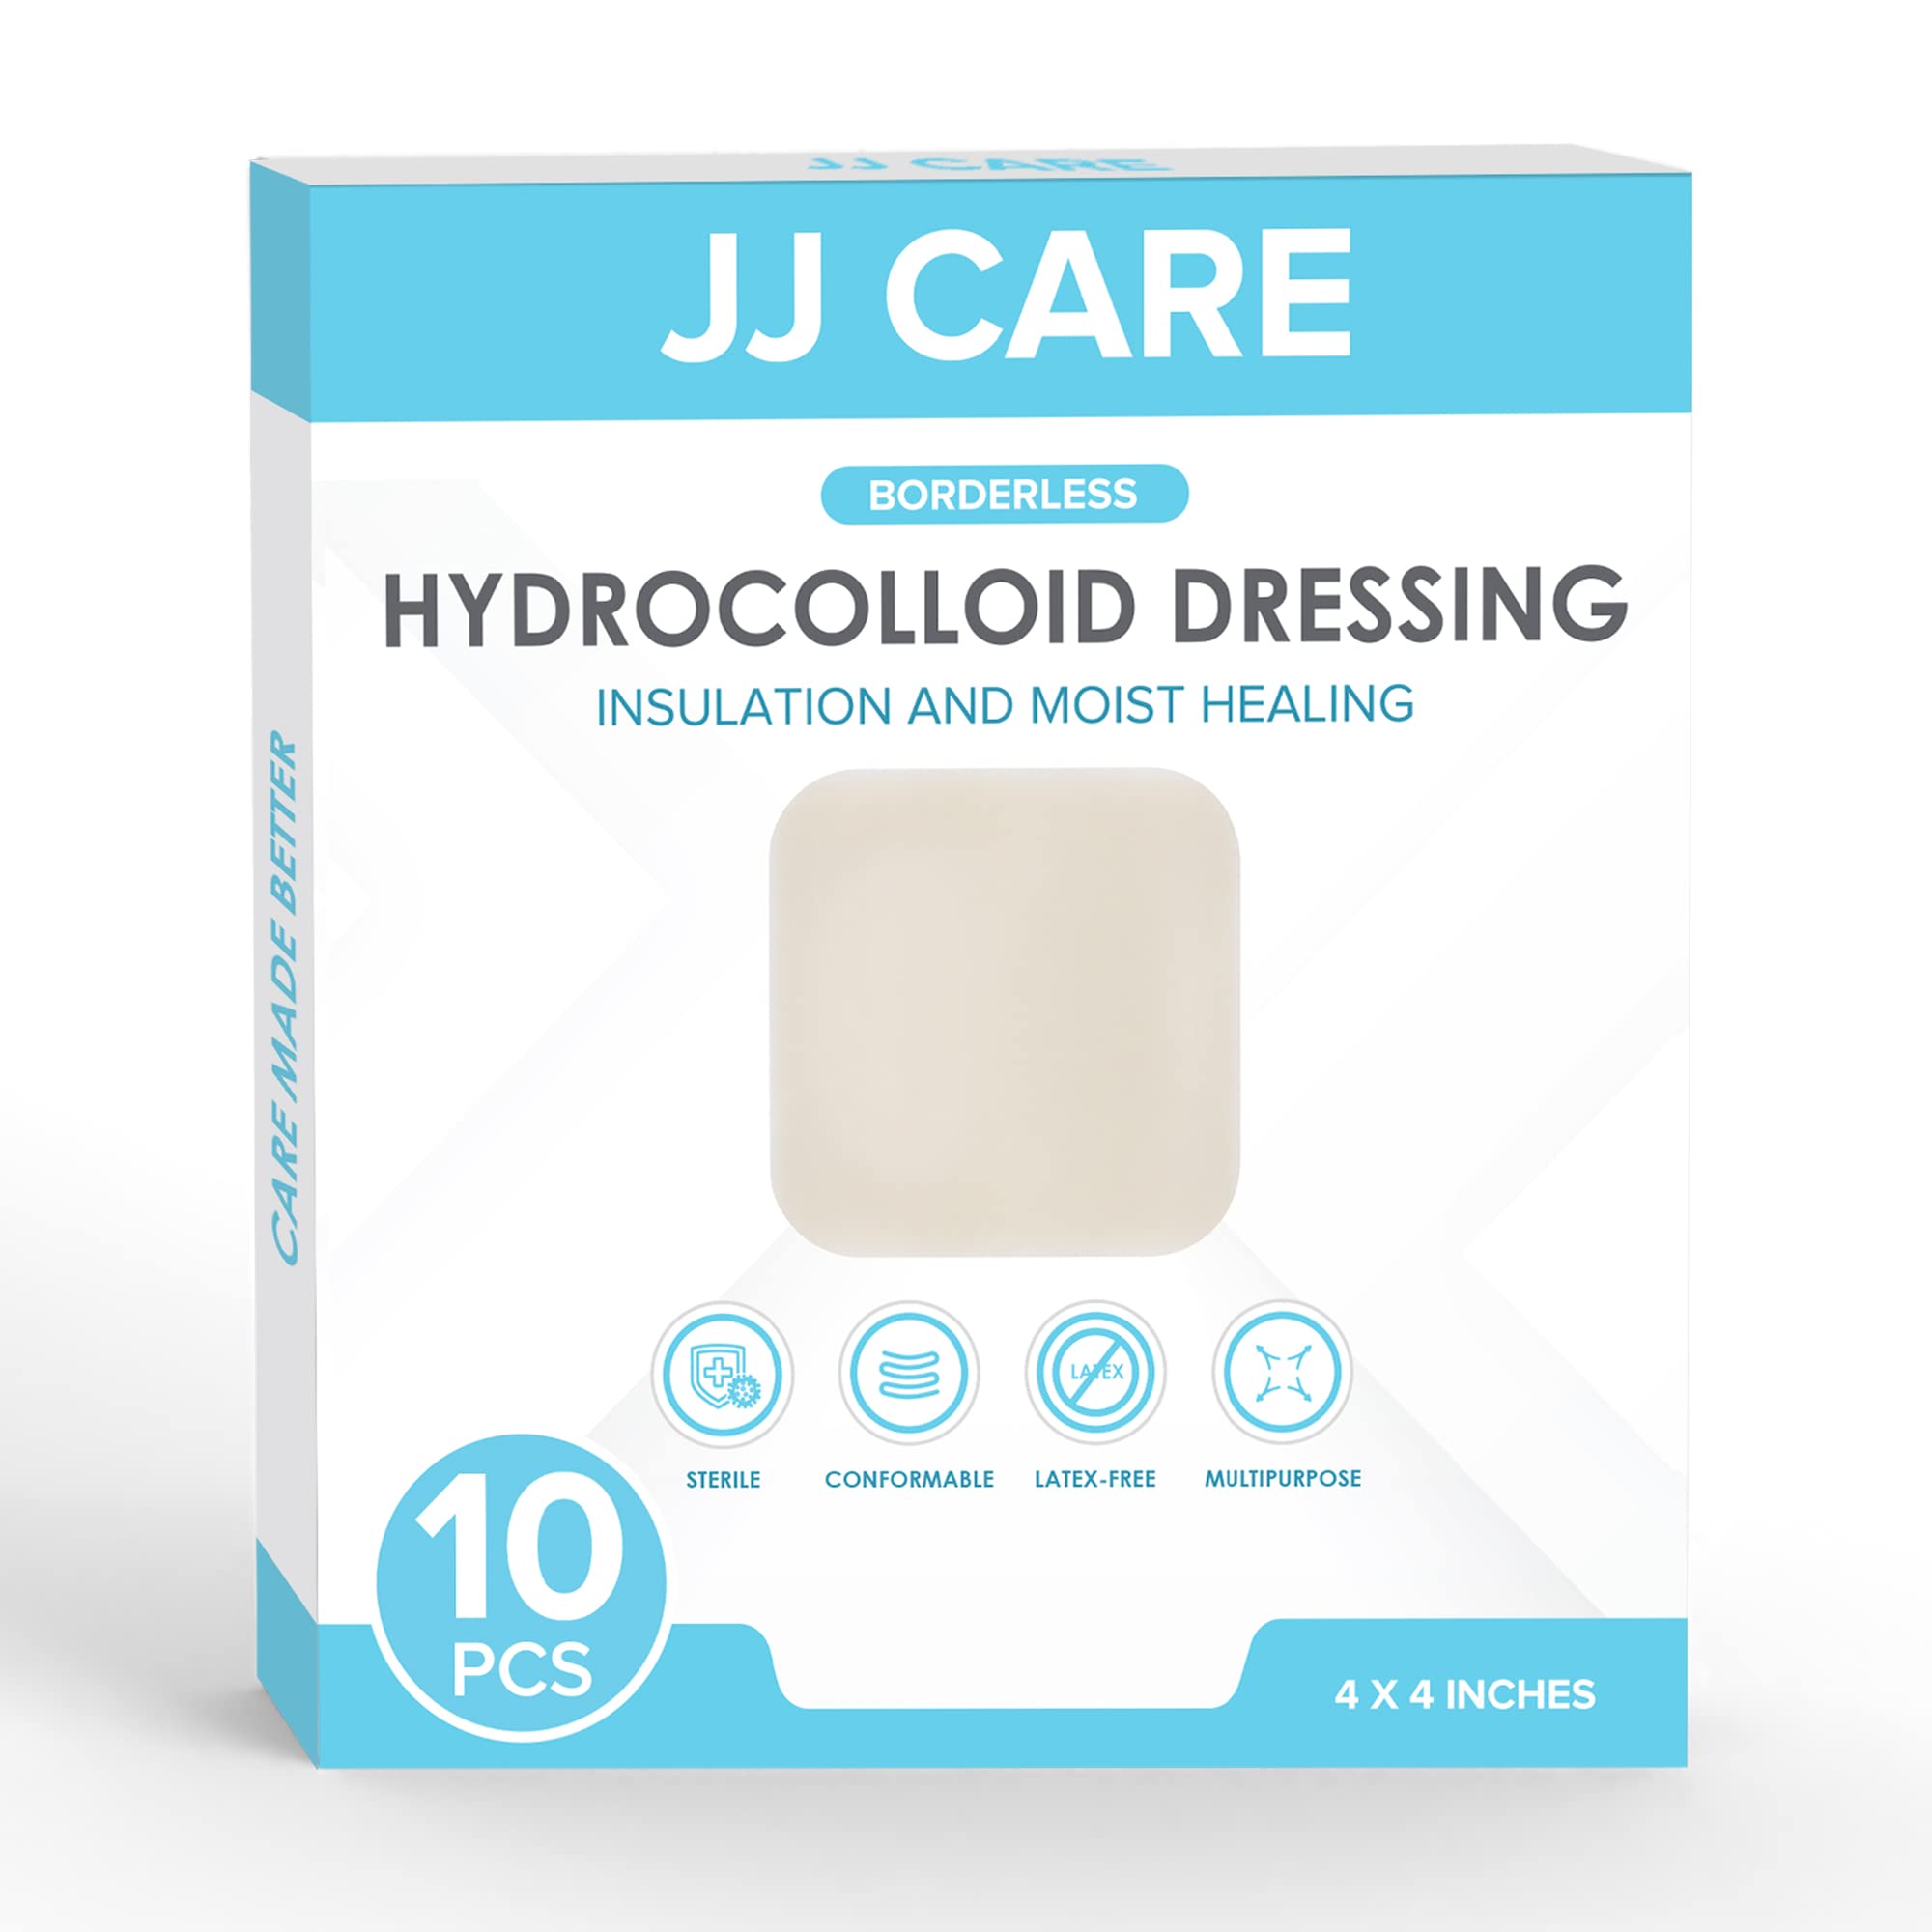 JJ CARE Hydrocolloid Dressing Pack 10 4x4 Hydrocolloid Bandages w/o Border  Self-Adhesive Hydrocolloid Wound Dressing Faster Healing for Bedsores  Blisters and Acne